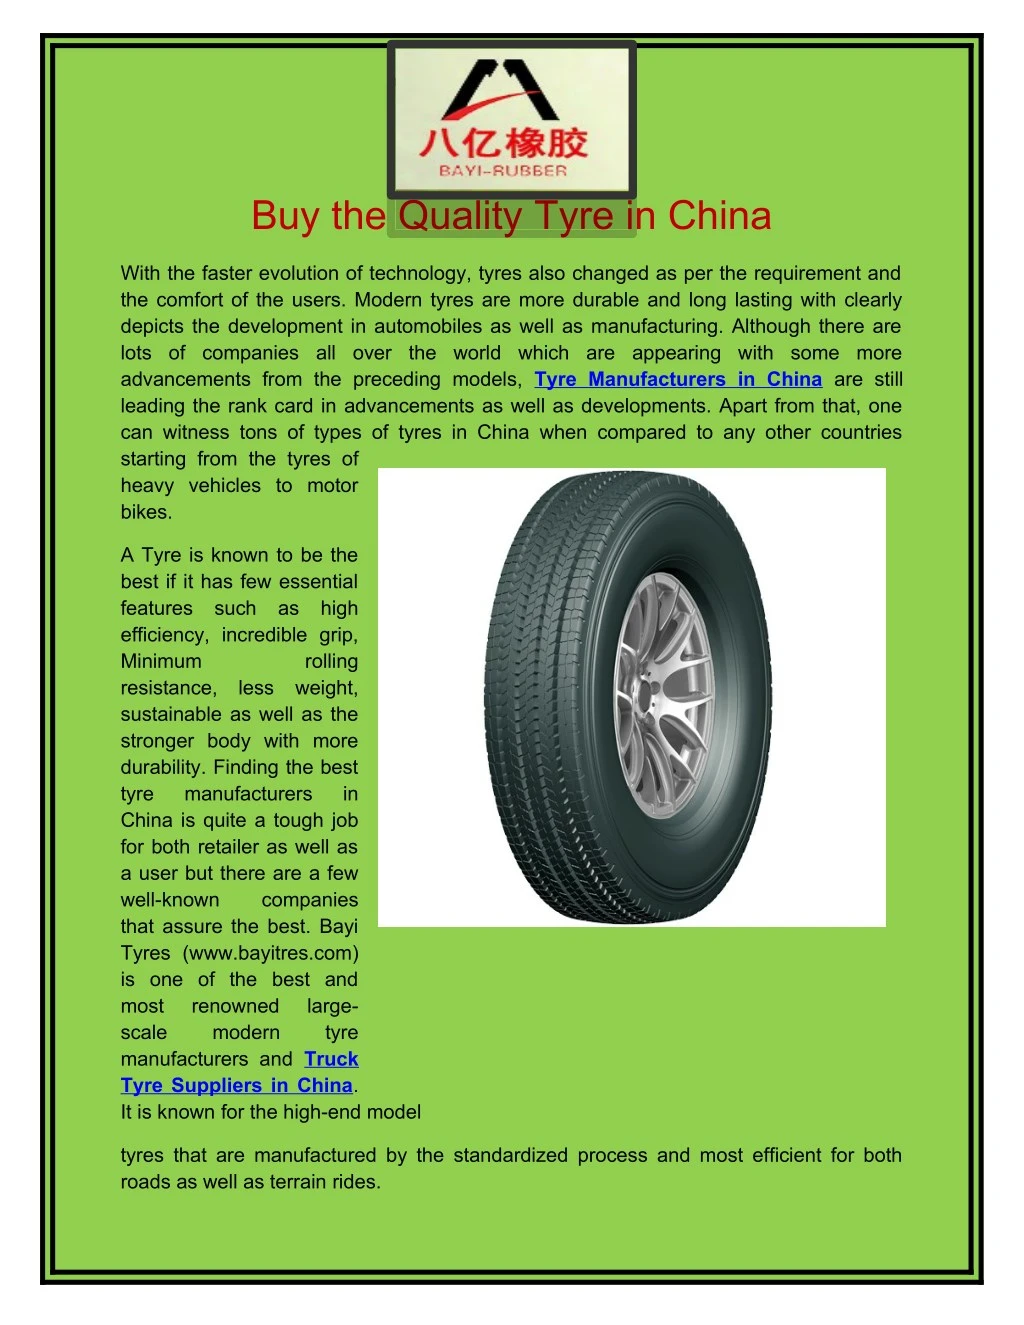 buy the quality tyre in china